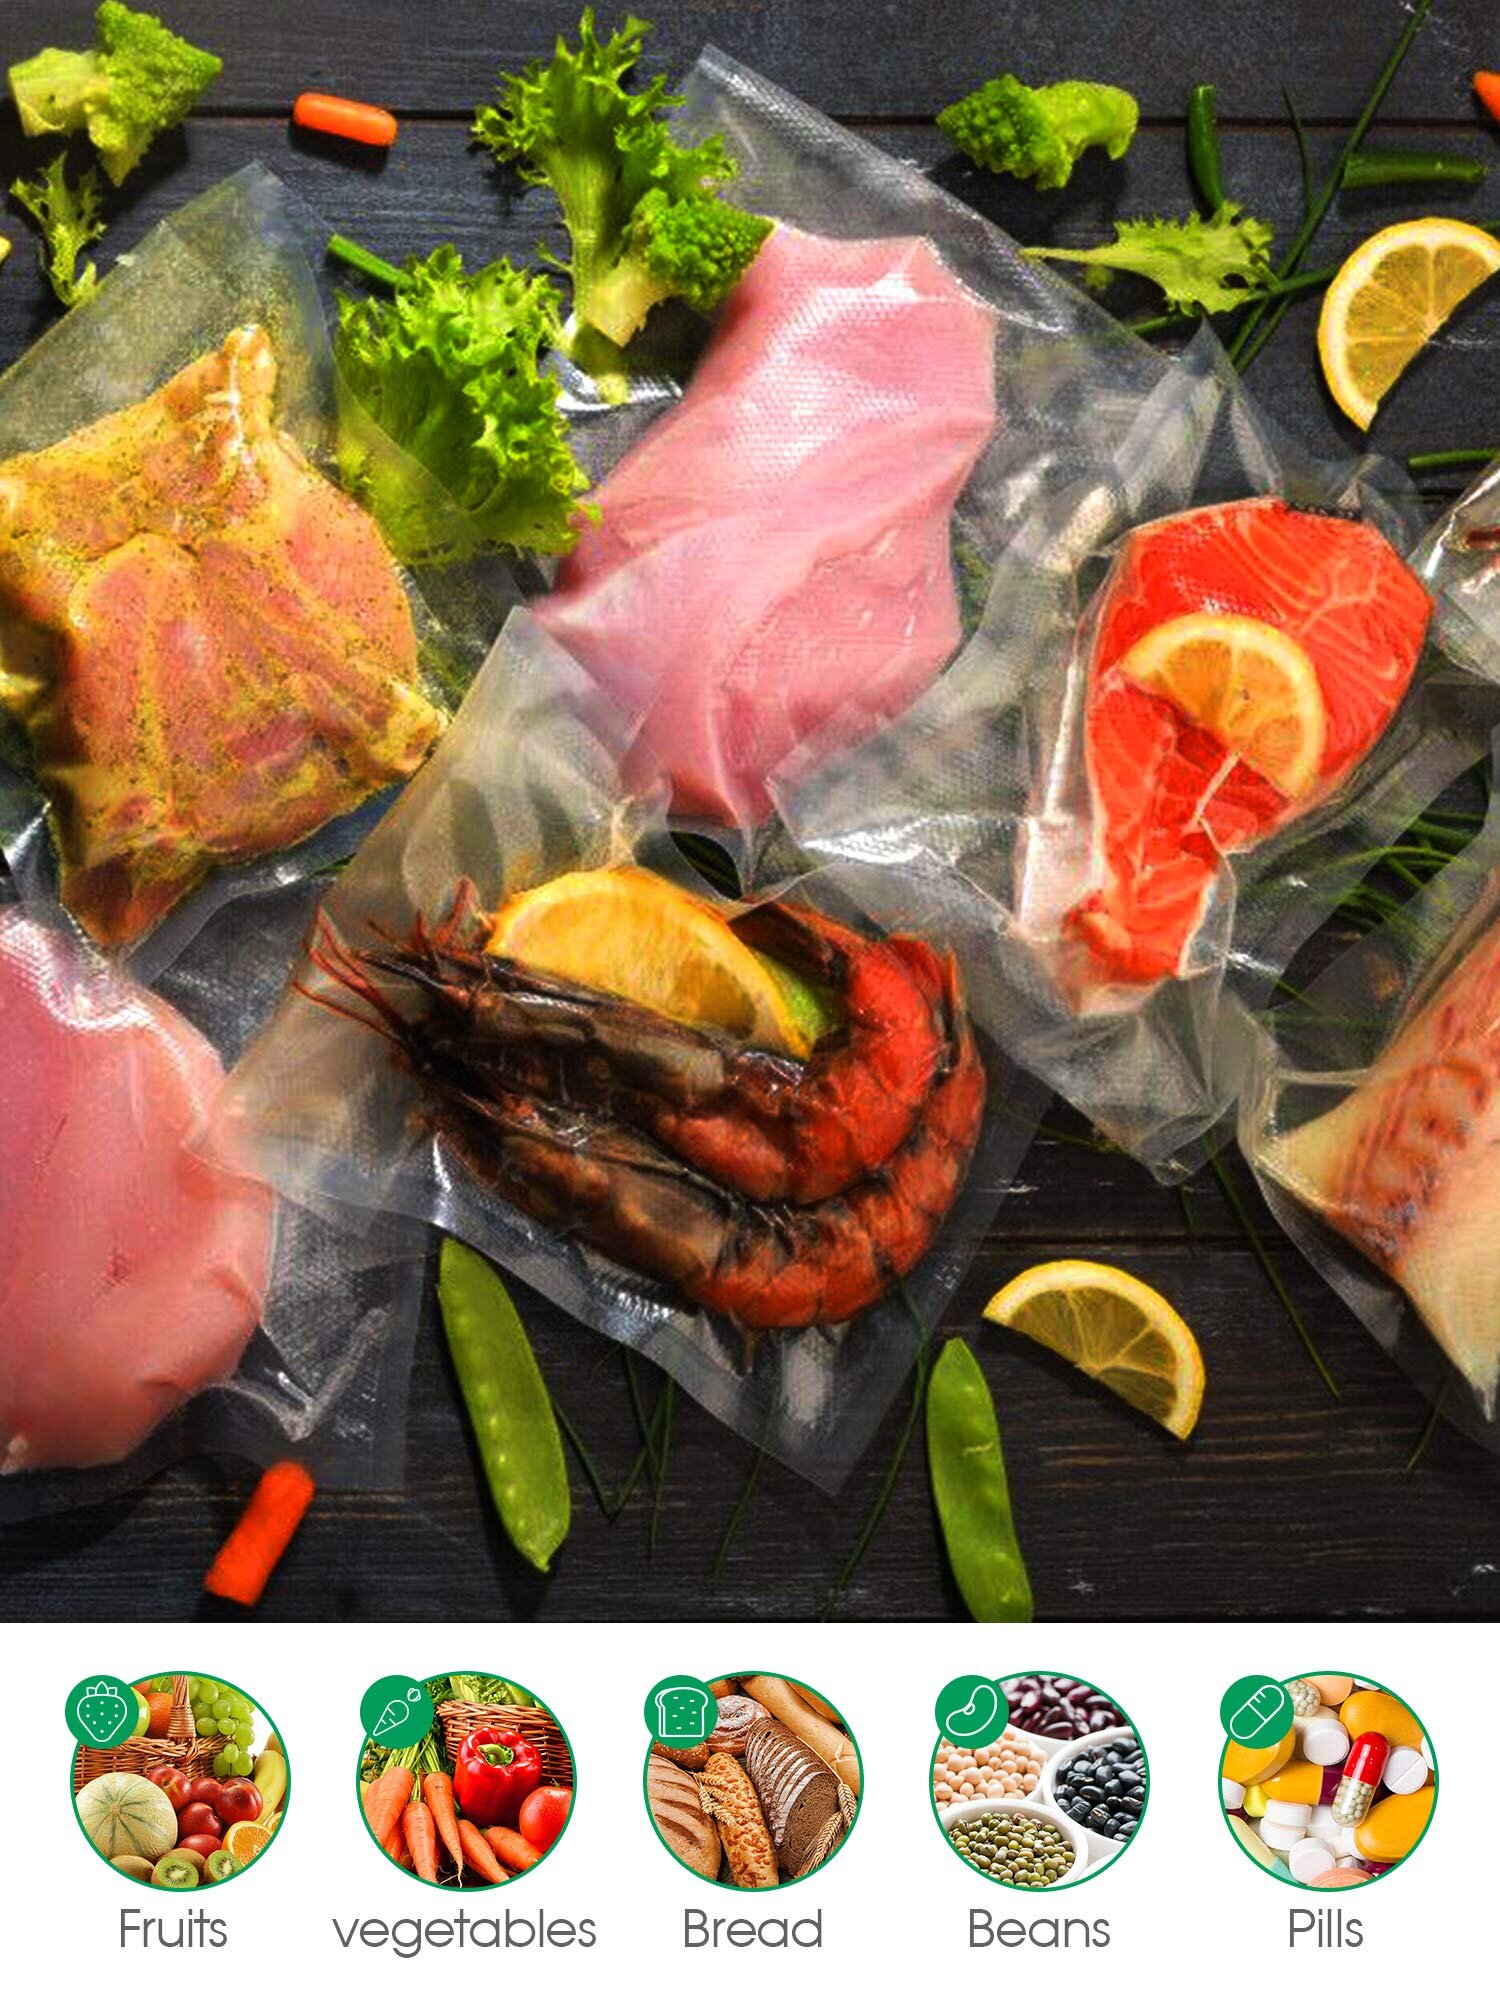 4 Rolls Commercial Grade Vacuum Sealer Bags Roll For Food Saver And Sous Vide 